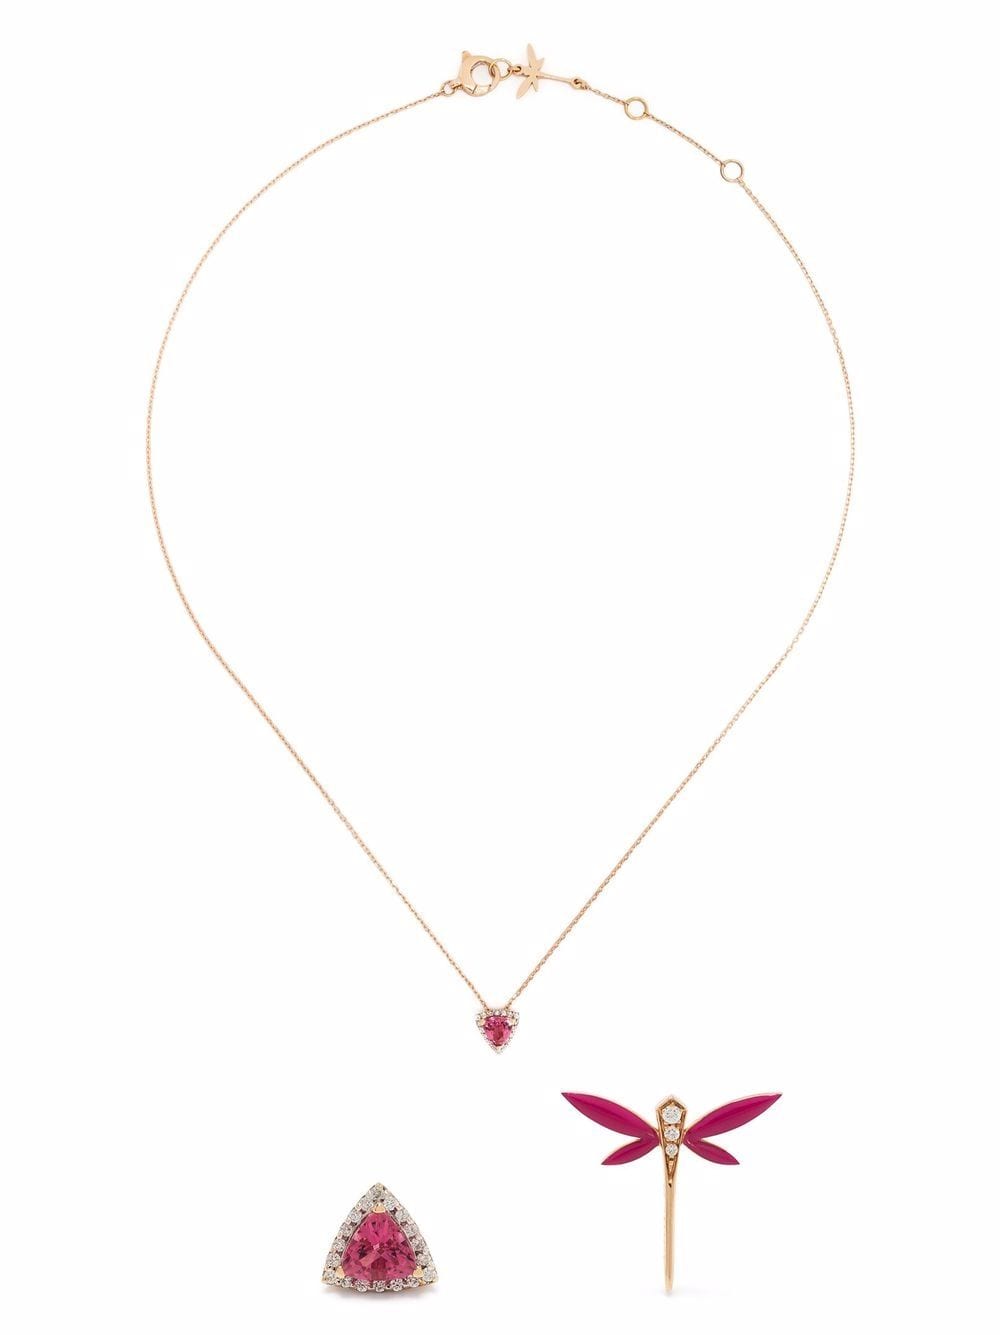 18kt rose gold Dragonfly earrings and necklace set